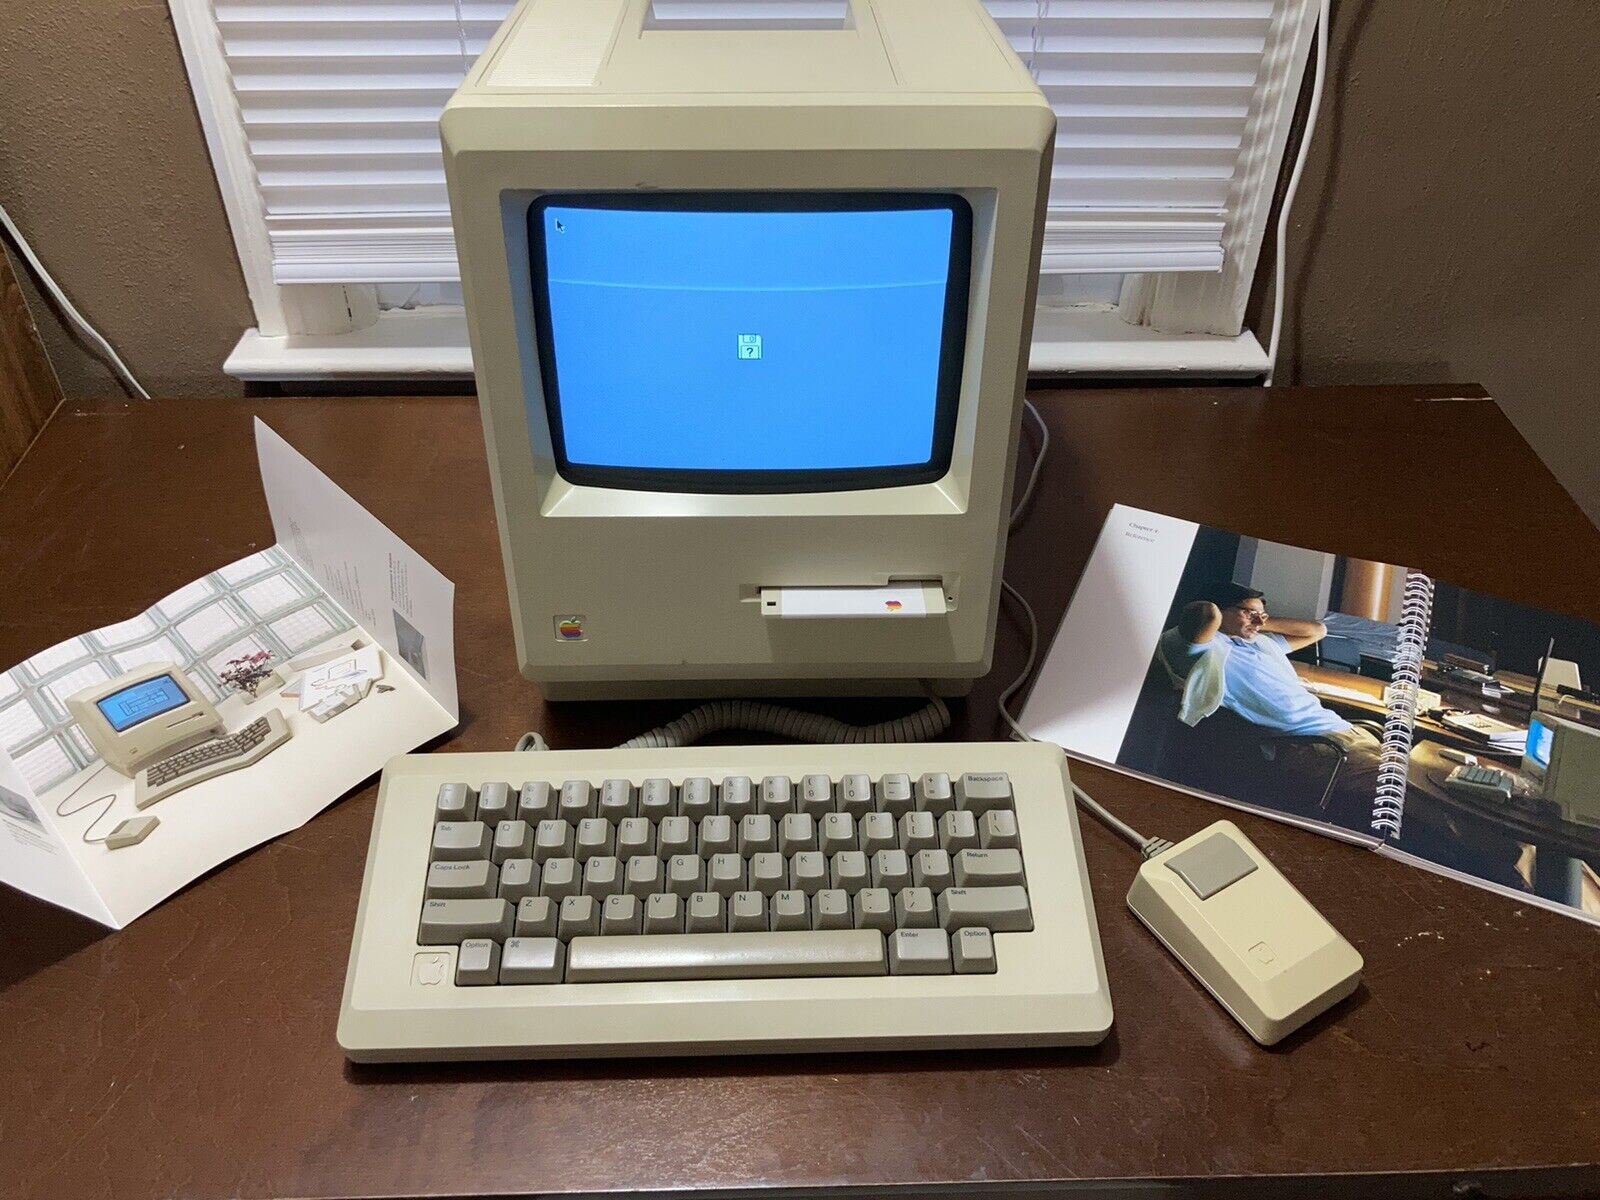 1984 APPLE MACINTOSH 128K M0001 FIRST MAC COMPLETE WORKING SYSTEM LOW SERIAL